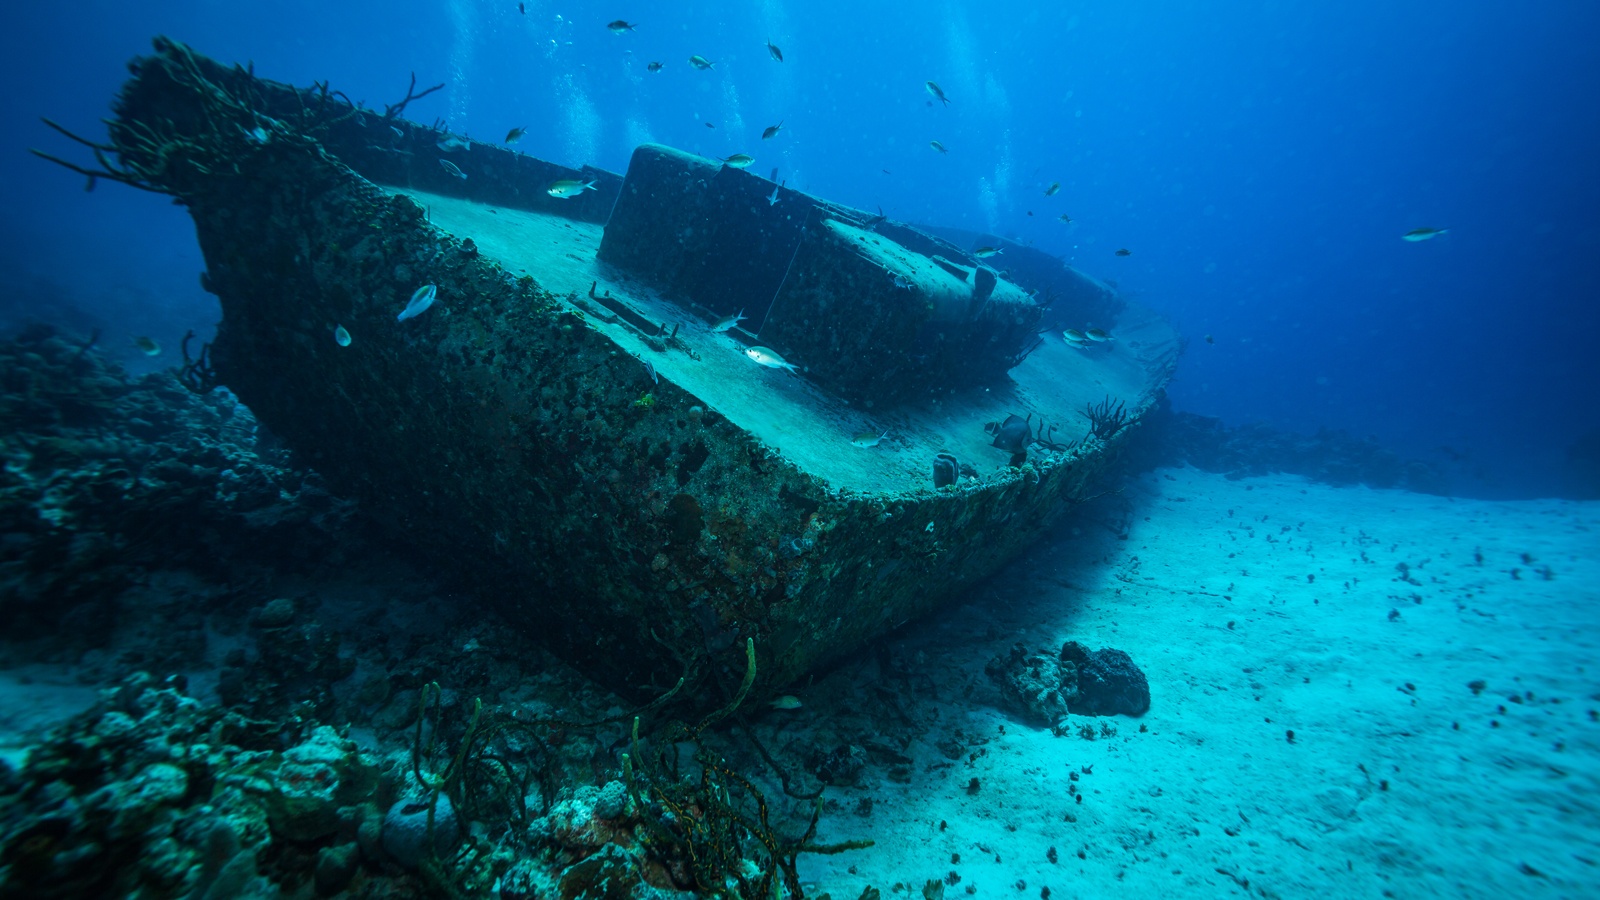 Underwater drone discovers and explores 100-year-old shipwreck